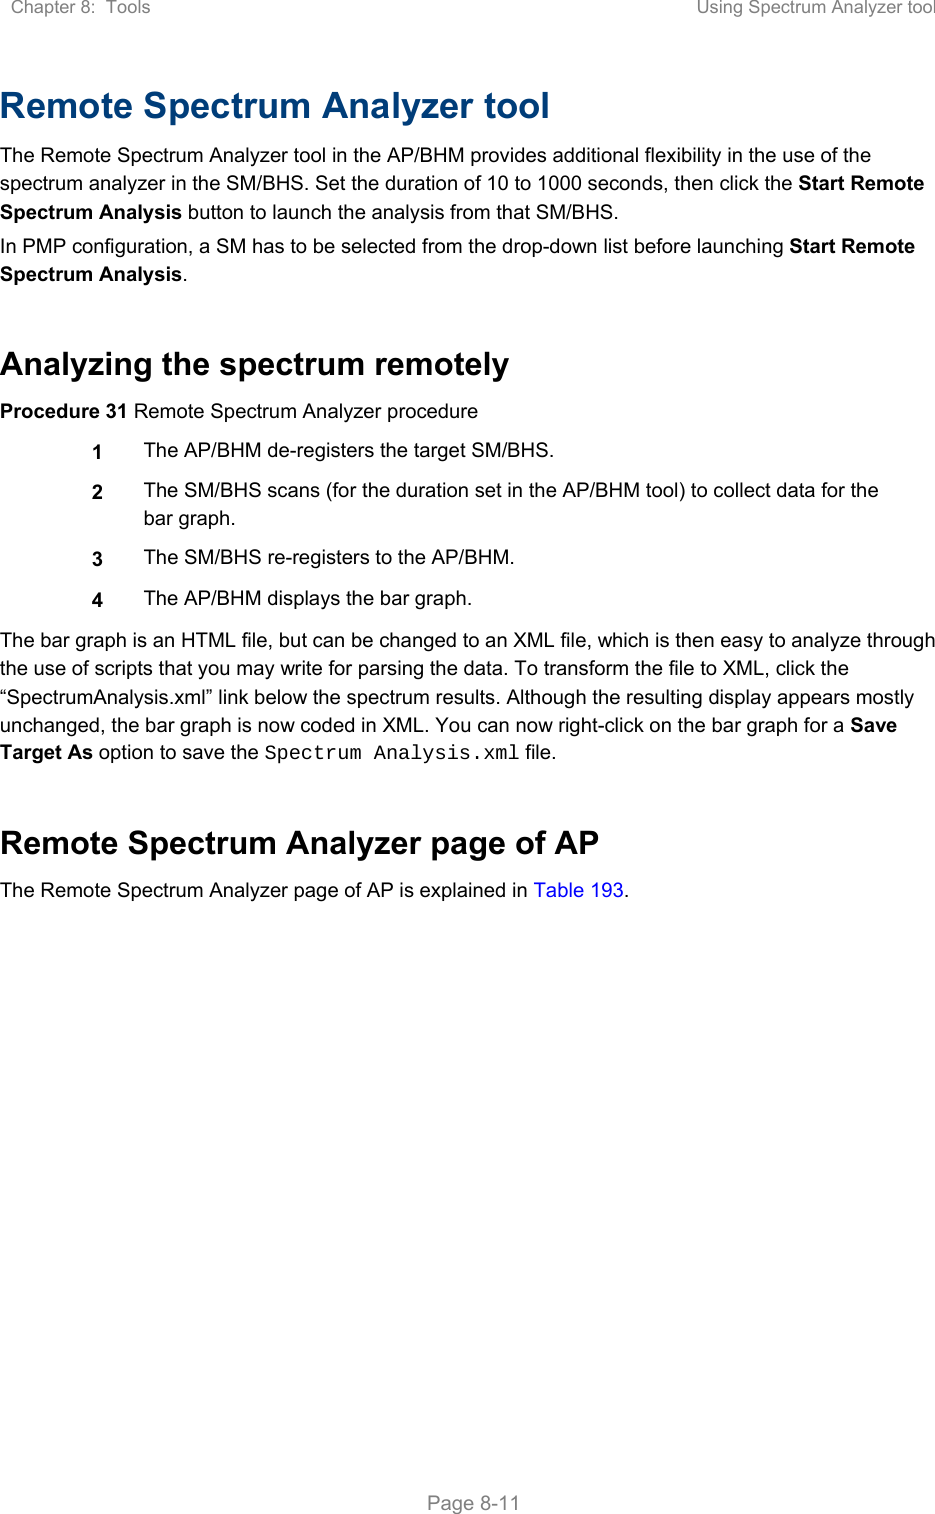 Chapter 8:  Tools  Using Spectrum Analyzer tool   Page 8-11 Remote Spectrum Analyzer tool  The Remote Spectrum Analyzer tool in the AP/BHM provides additional flexibility in the use of the spectrum analyzer in the SM/BHS. Set the duration of 10 to 1000 seconds, then click the Start Remote Spectrum Analysis button to launch the analysis from that SM/BHS.  In PMP configuration, a SM has to be selected from the drop-down list before launching Start Remote Spectrum Analysis.  Analyzing the spectrum remotely Procedure 31 Remote Spectrum Analyzer procedure 1  The AP/BHM de-registers the target SM/BHS. 2  The SM/BHS scans (for the duration set in the AP/BHM tool) to collect data for the bar graph. 3  The SM/BHS re-registers to the AP/BHM. 4  The AP/BHM displays the bar graph. The bar graph is an HTML file, but can be changed to an XML file, which is then easy to analyze through the use of scripts that you may write for parsing the data. To transform the file to XML, click the “SpectrumAnalysis.xml” link below the spectrum results. Although the resulting display appears mostly unchanged, the bar graph is now coded in XML. You can now right-click on the bar graph for a Save Target As option to save the Spectrum Analysis.xml file.  Remote Spectrum Analyzer page of AP The Remote Spectrum Analyzer page of AP is explained in Table 193. 